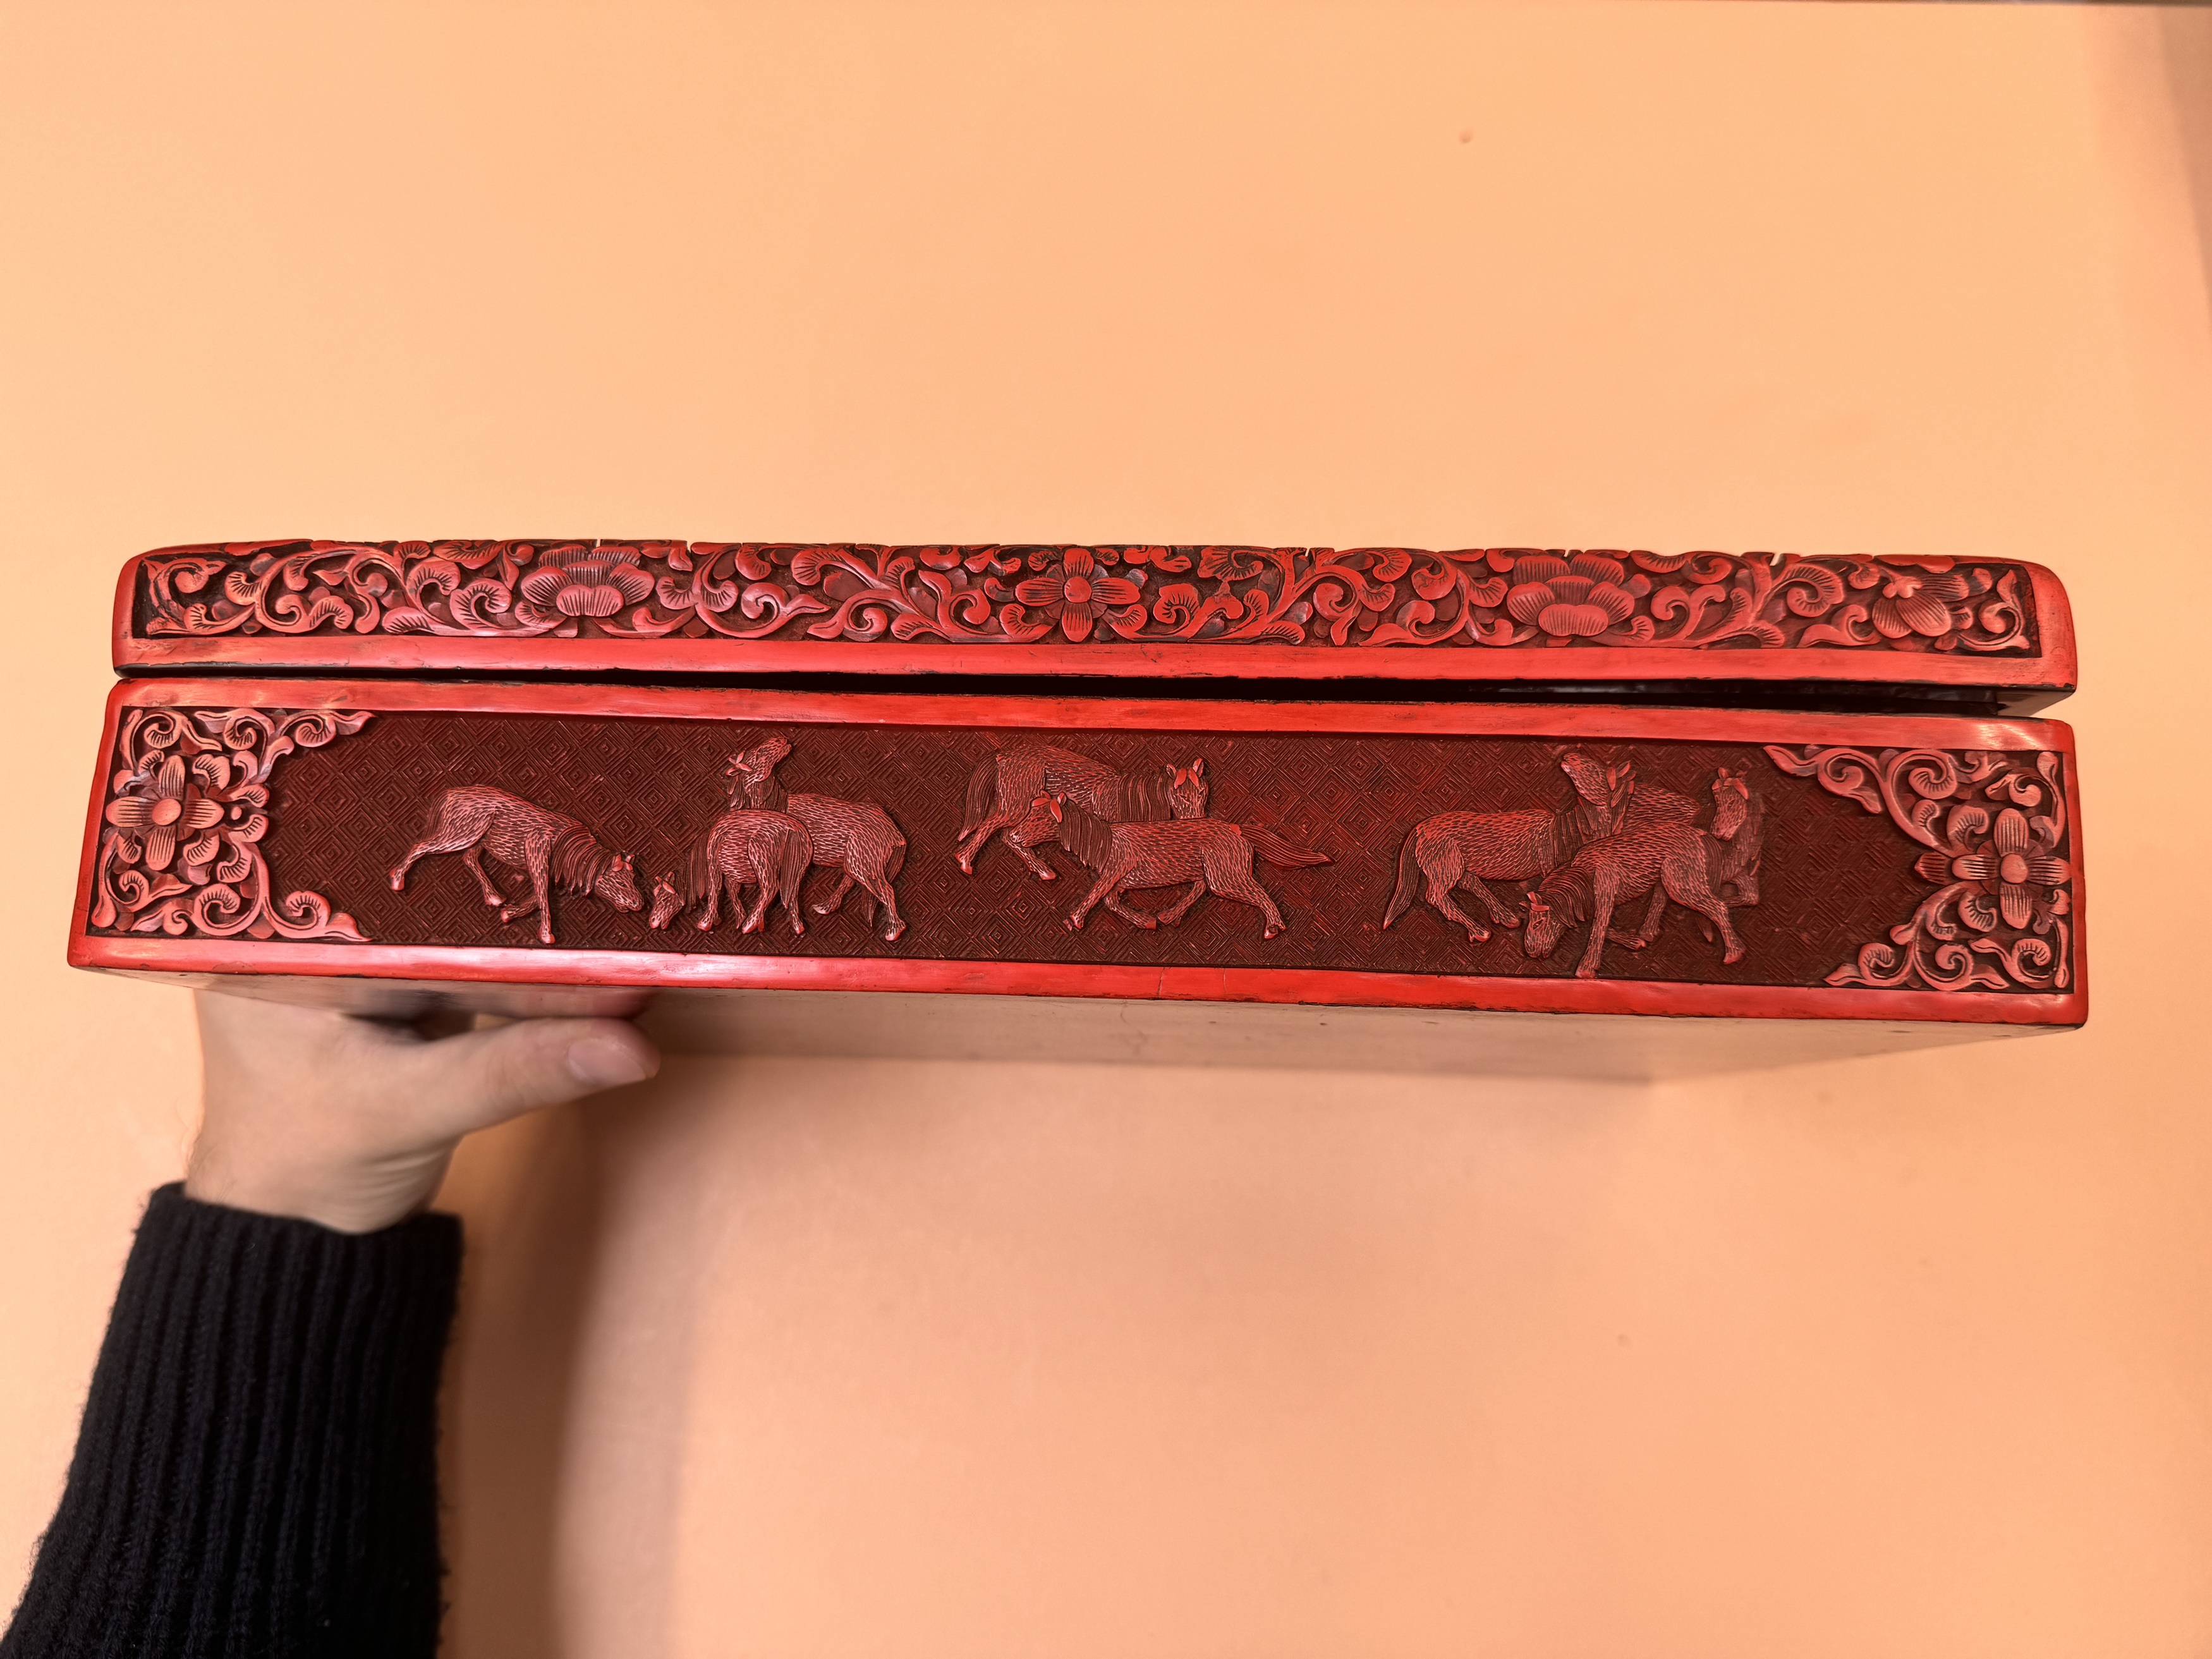 A LARGE AND FINE CHINESE CINNABAR LACQUER 'FIGURAL' BOX AND COVER 早十九世紀 剔紅人物故事圖紋方蓋盒 - Image 41 of 54